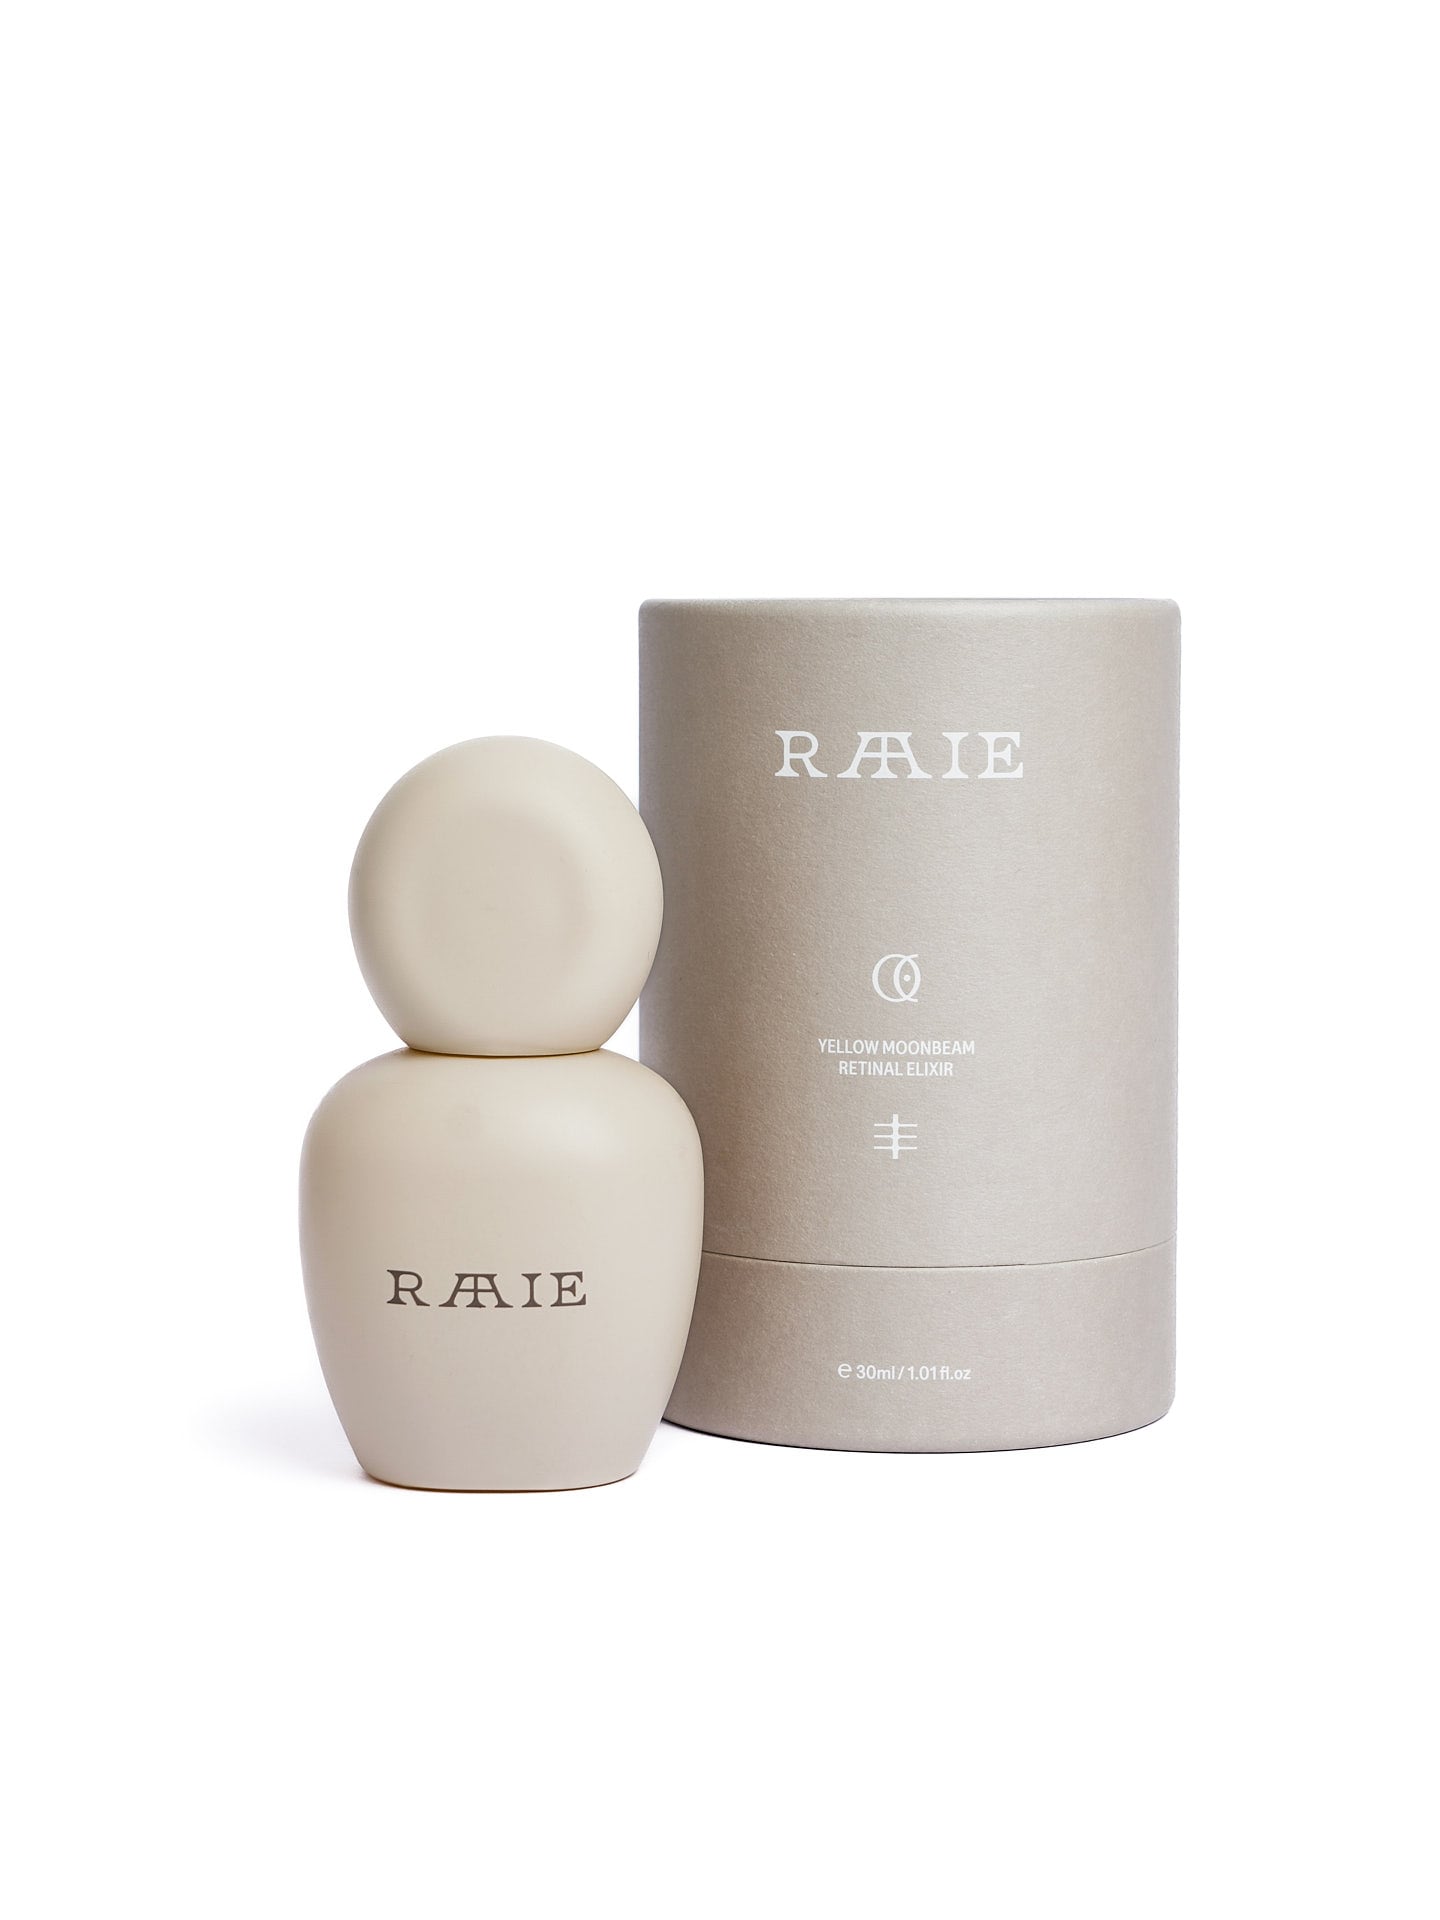 A beige bottle labeled "RAAIE" sits beside a cylindrical container in matching hues. The label on the container reads "Yellow Moonbeam Retinal Elixir" and holds a capacity of 50ml / 1.01 fl oz.